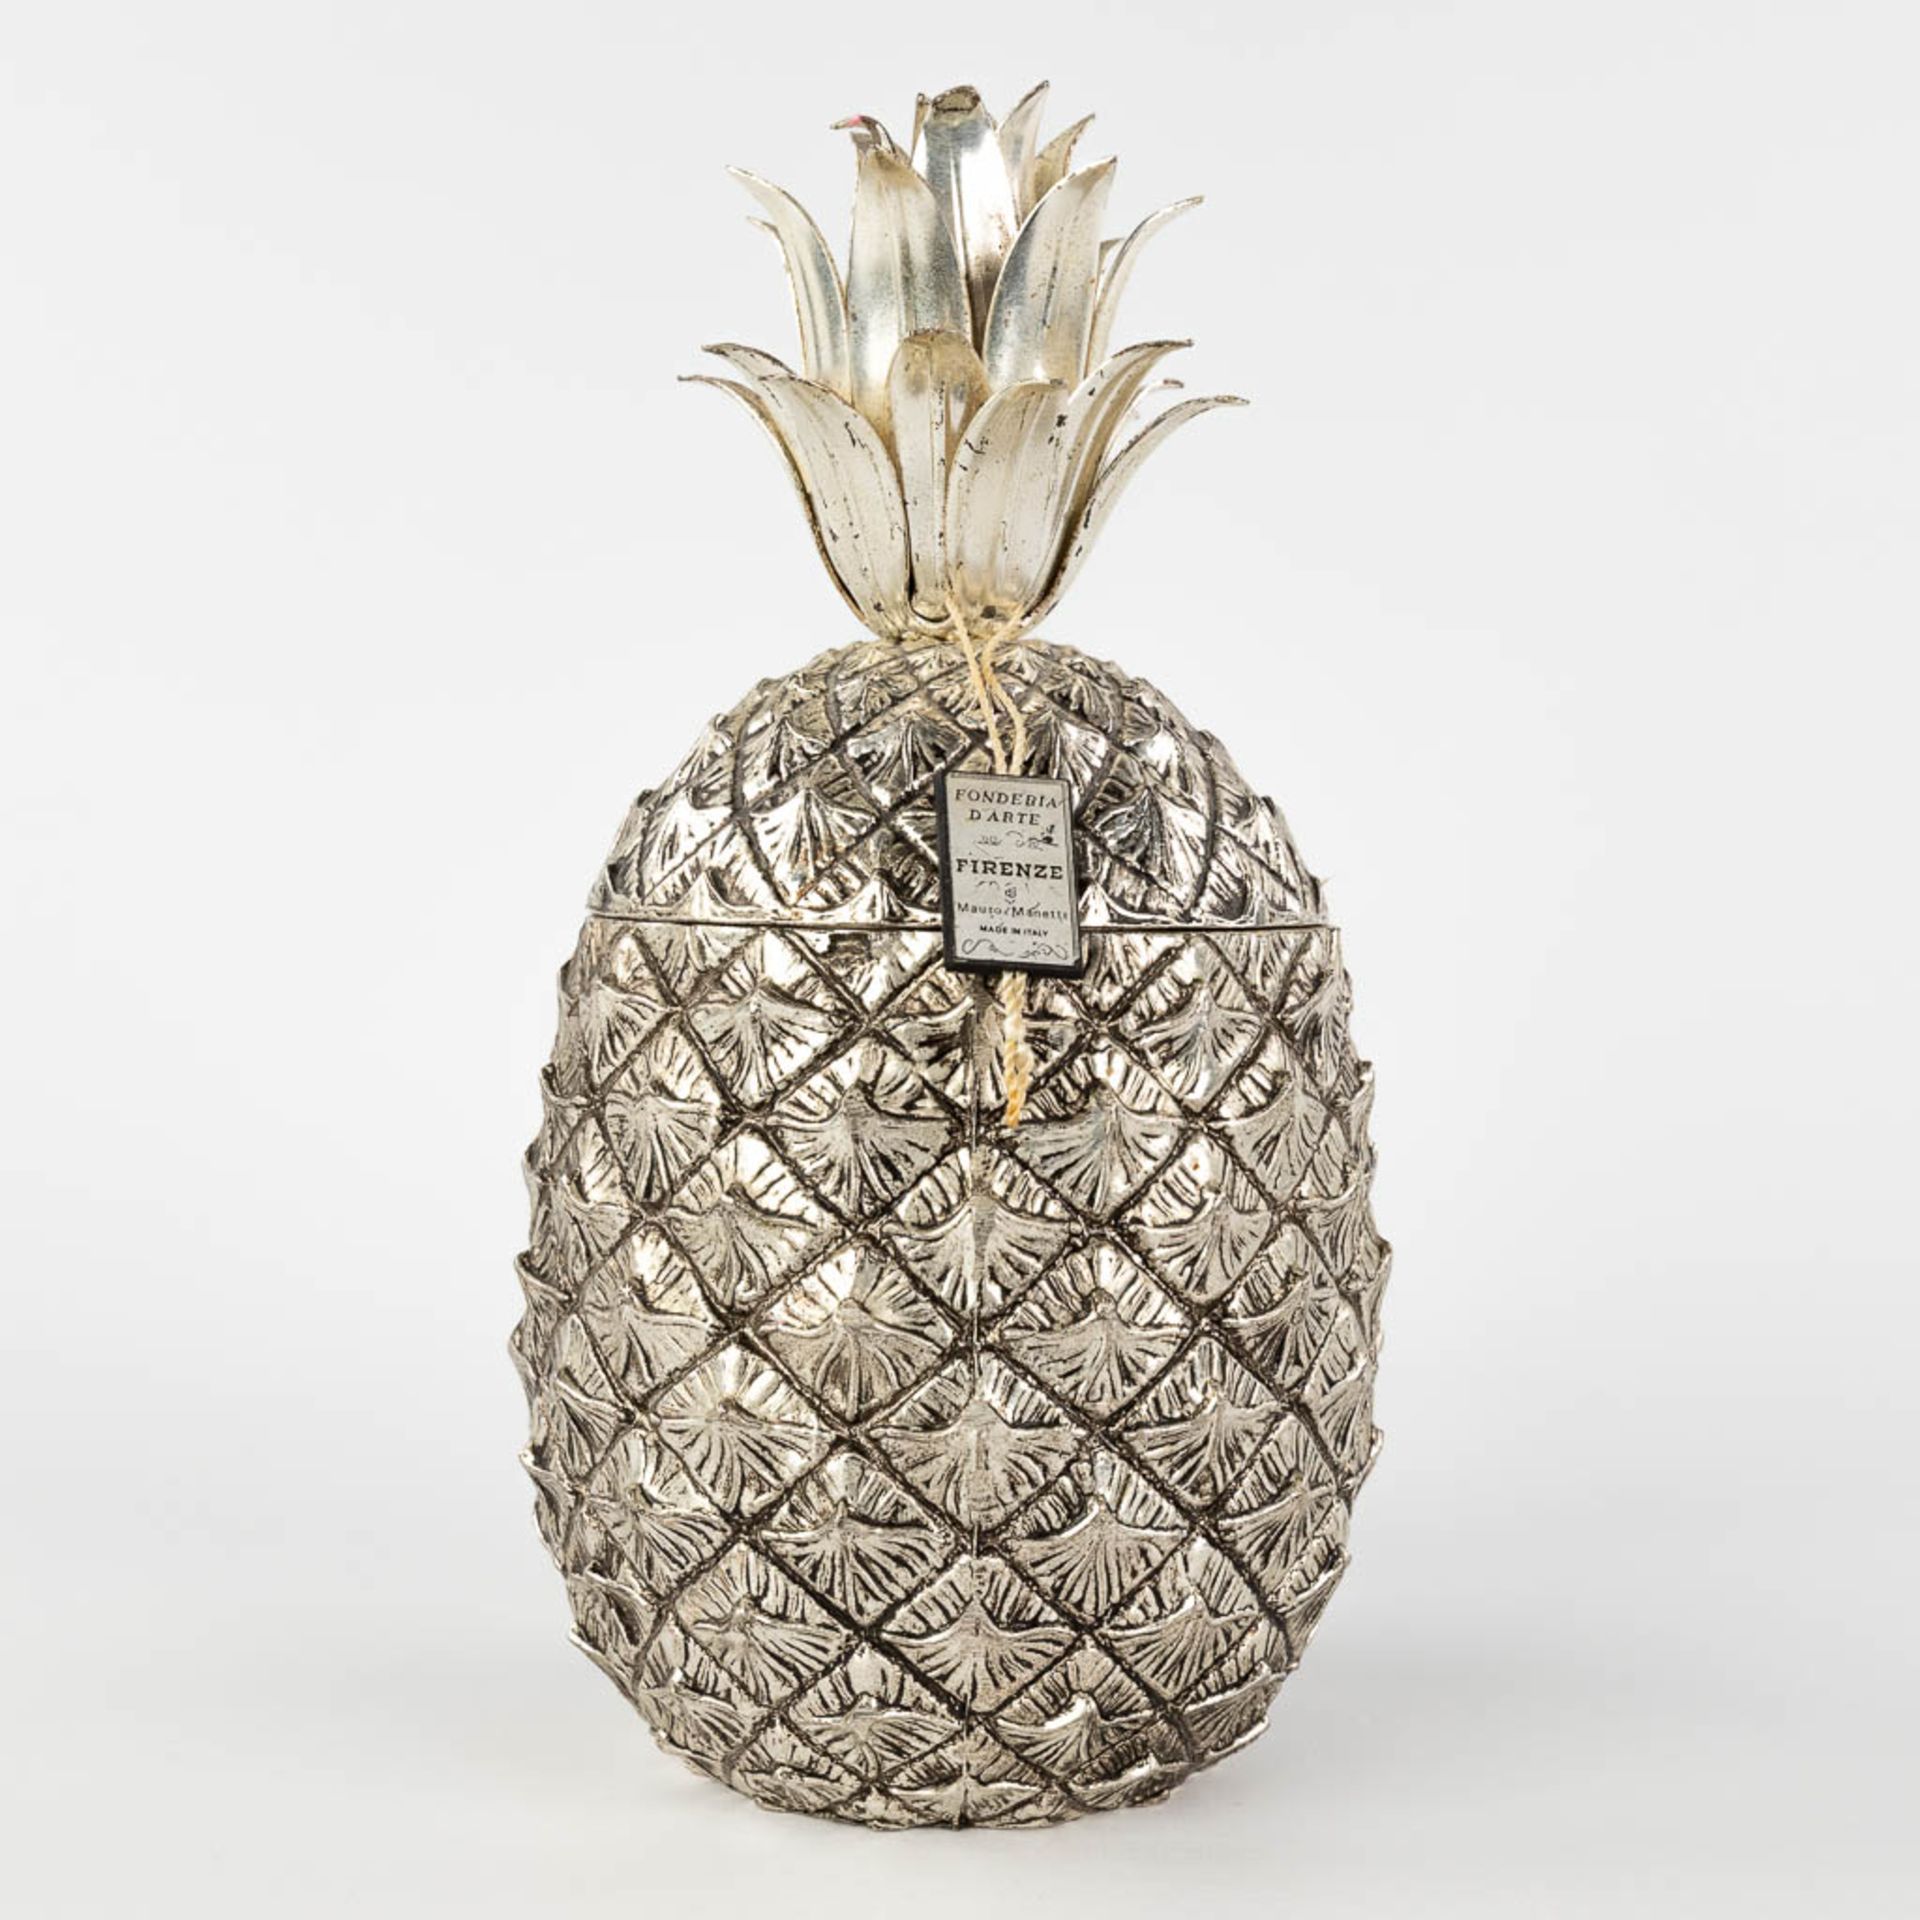 Mauro MANETTI (1946) 'Pineapple' an ice pail. (H:27 x D:13 cm) - Image 3 of 12